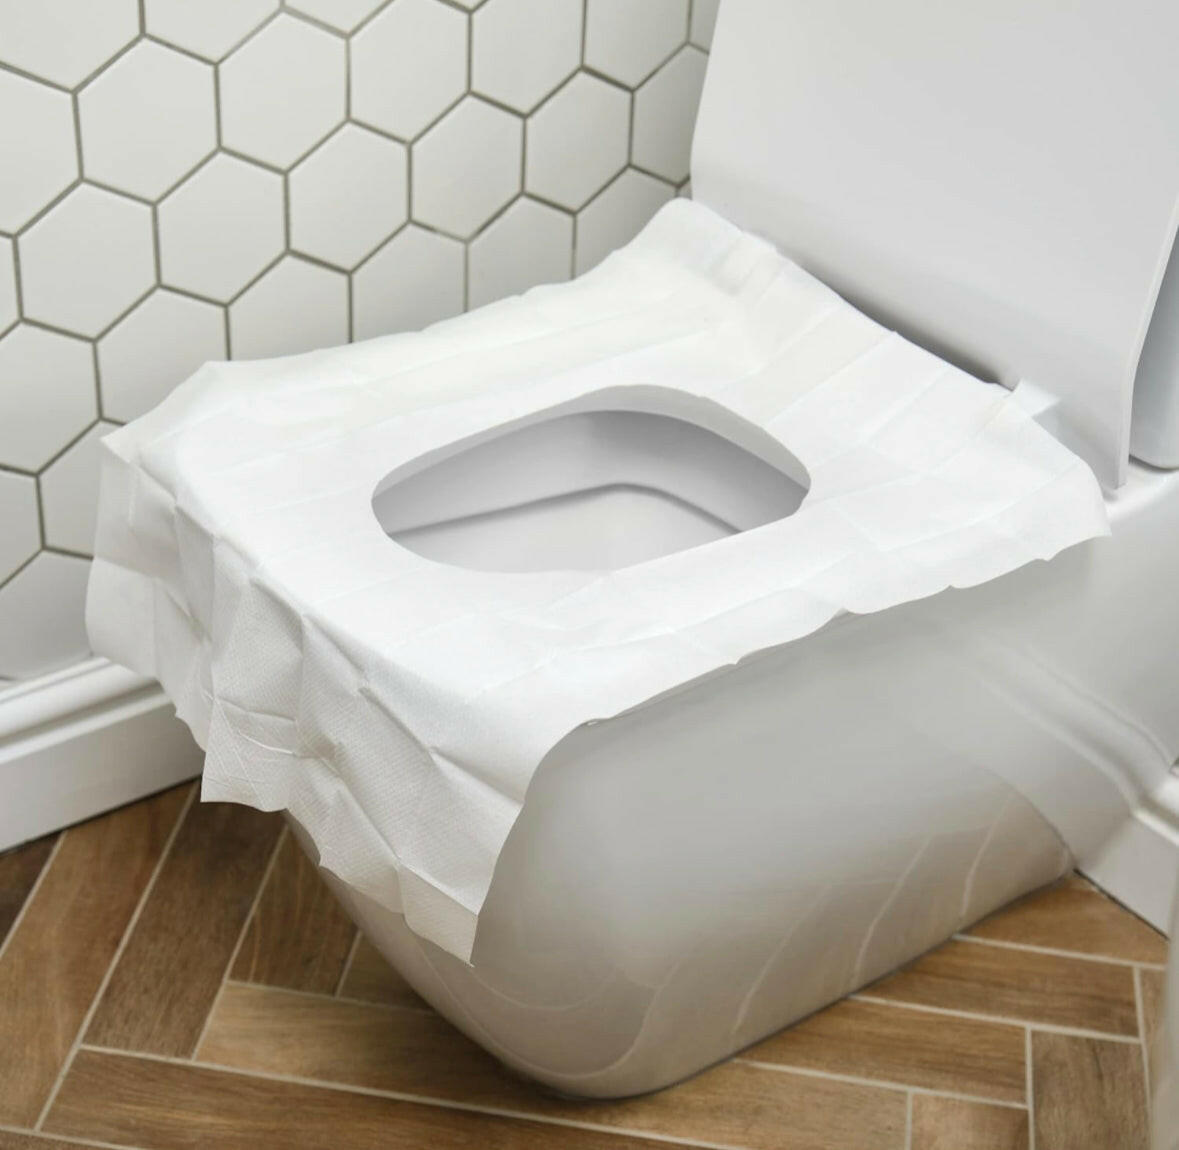 Prince Lionheart Tinkle-To-Go Disposable Toilet Seat Covers | Waterproof | Extra Large | Germ Protection | Portable | Contains 3 Pieces - White.